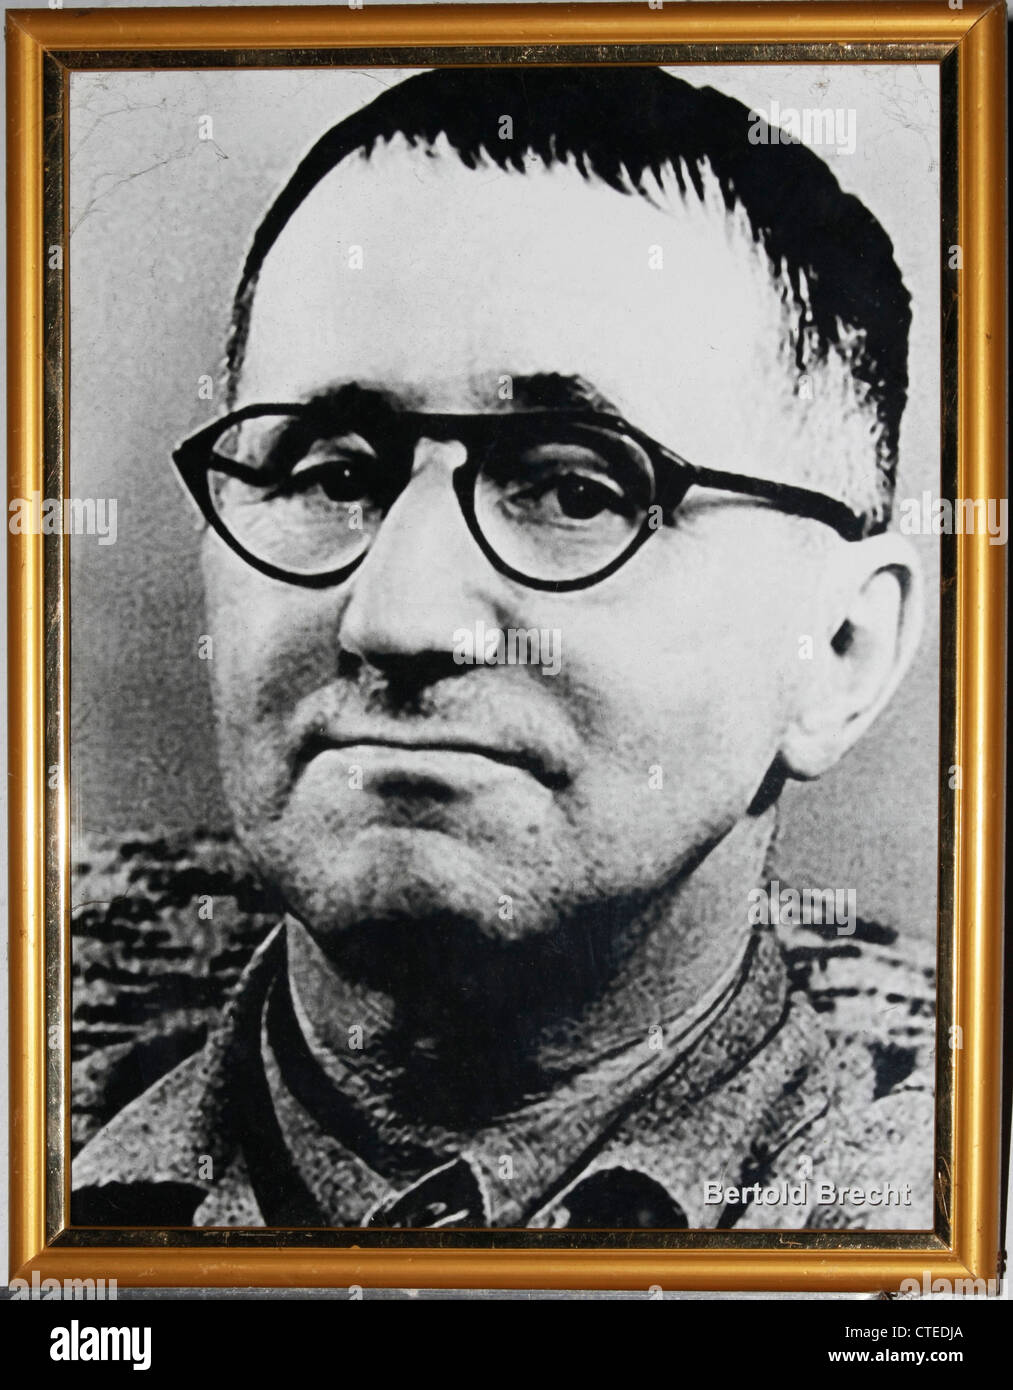 Bertolt Brecht was an influential German poet, playwright, and theatre director Stock Photo